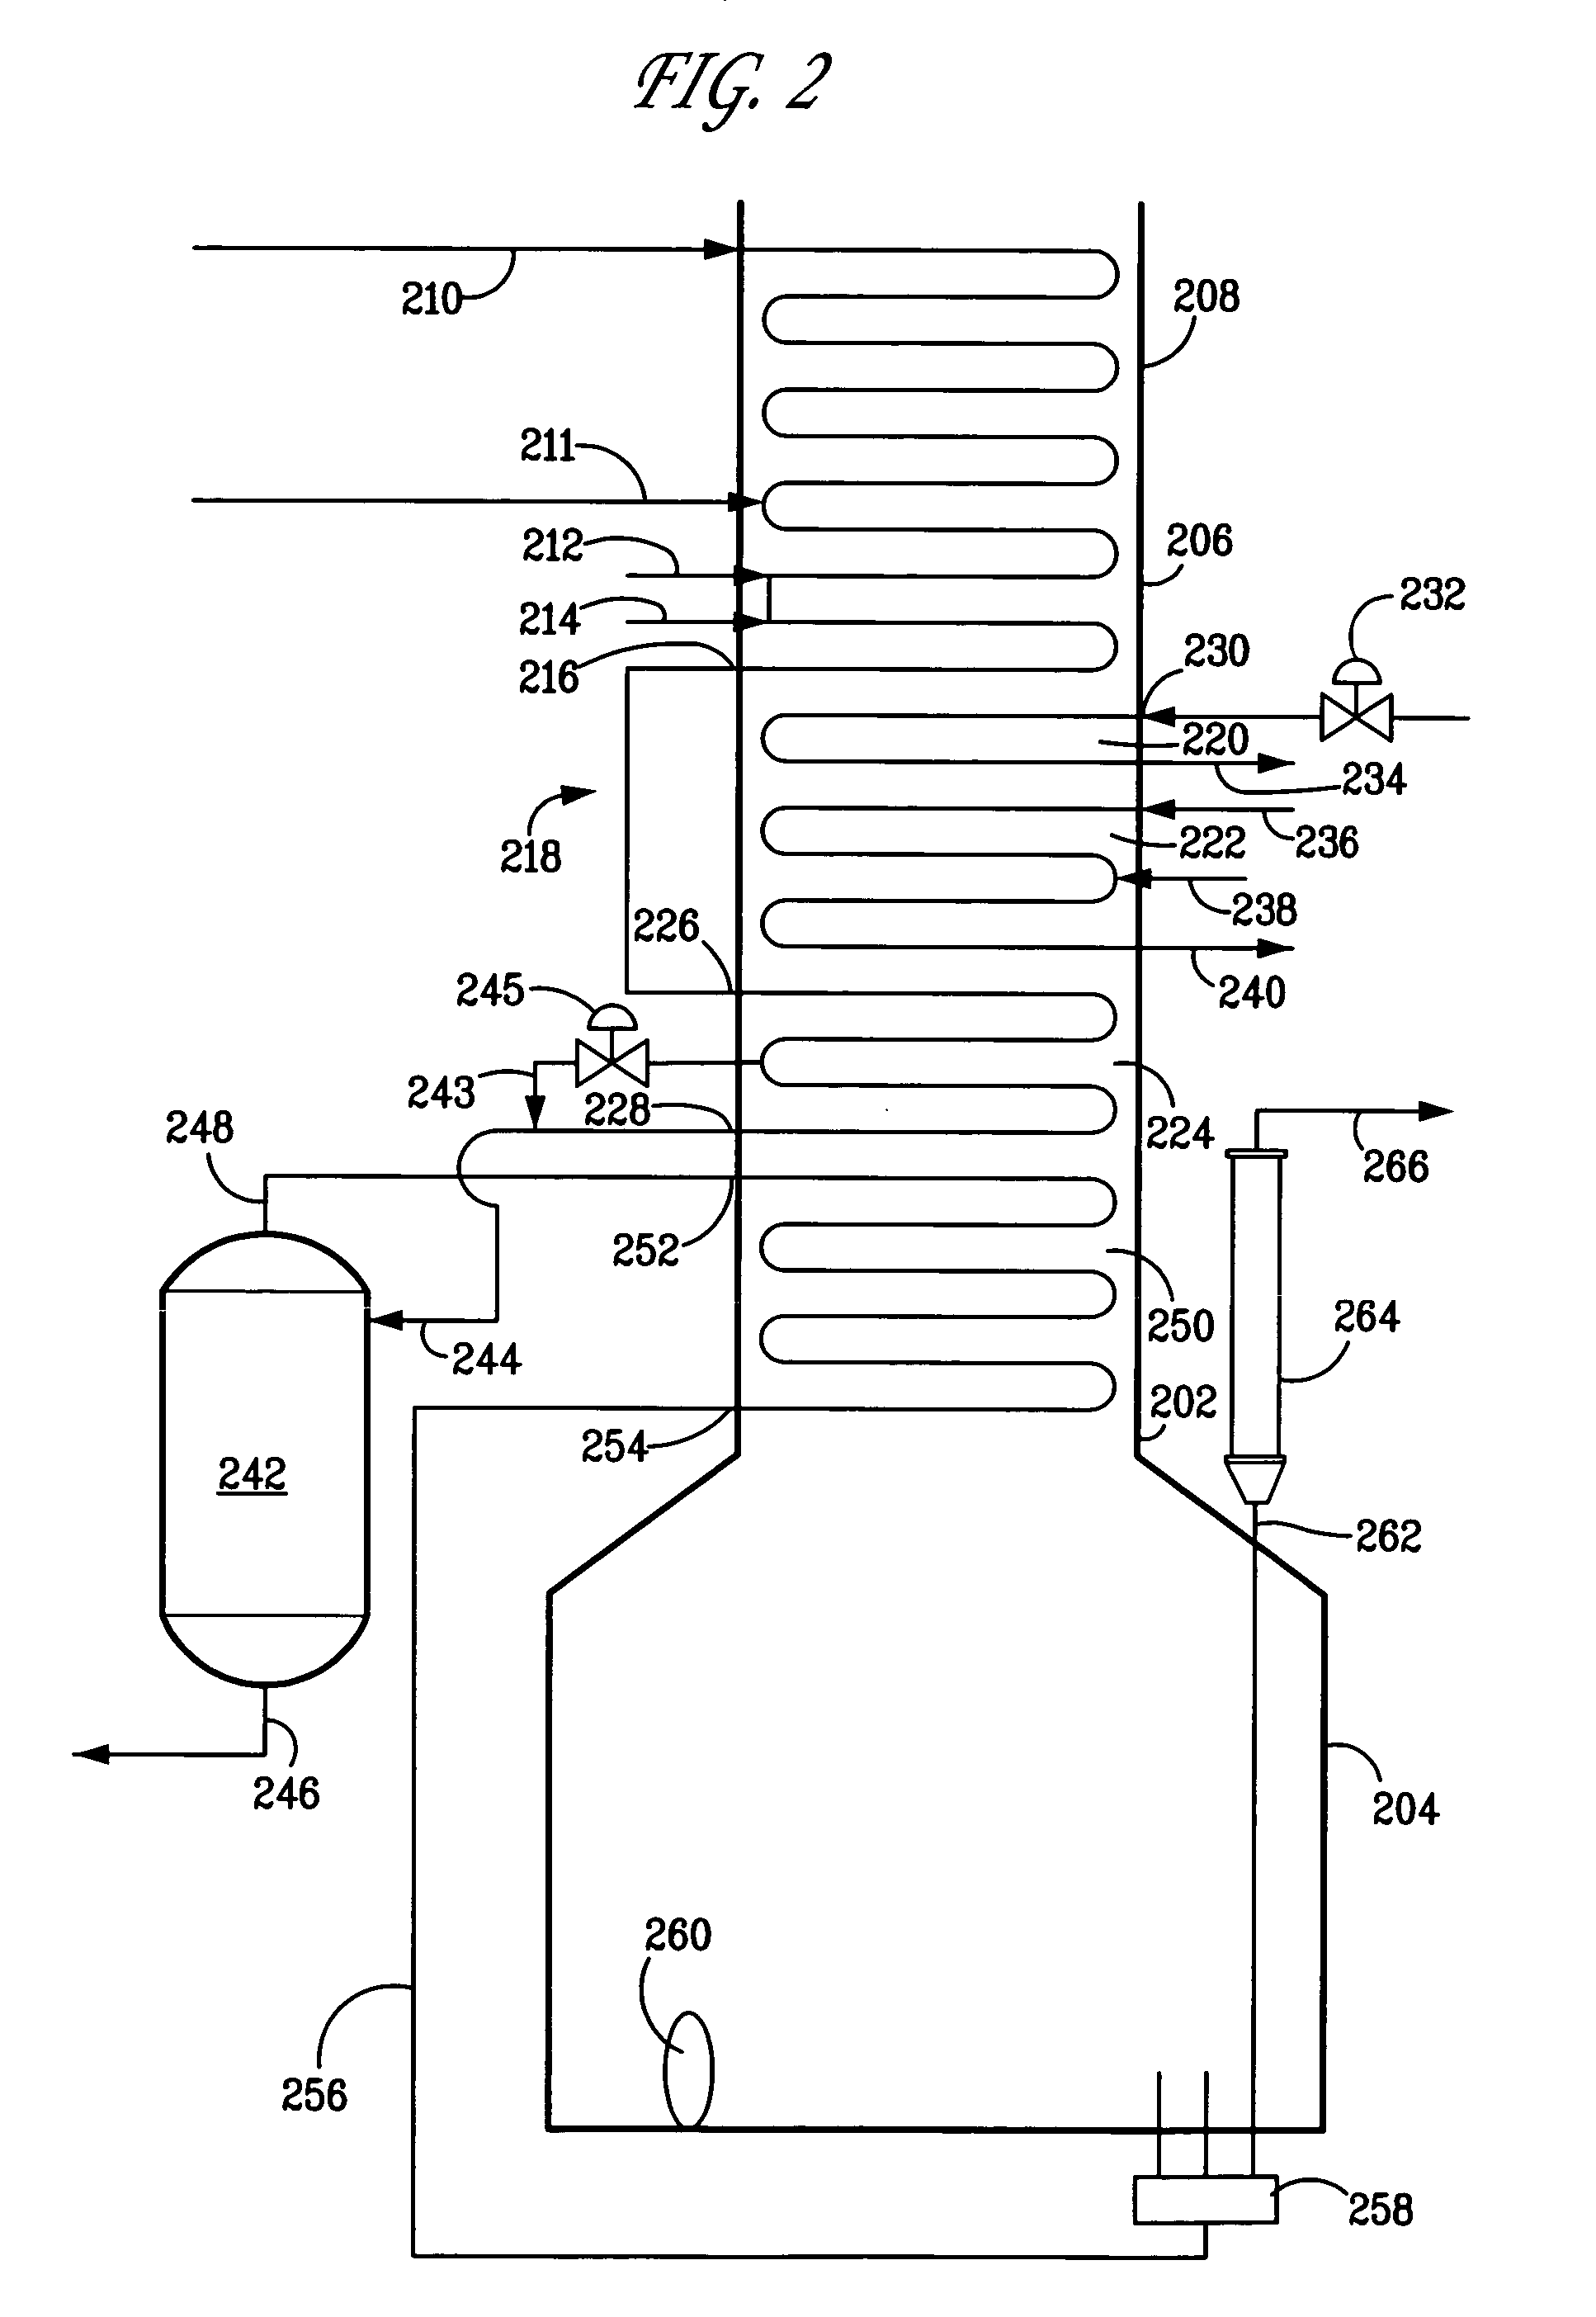 Apparatus and process for controlling temperature of heated feed directed to a flash drum whose overhead provides feed for cracking